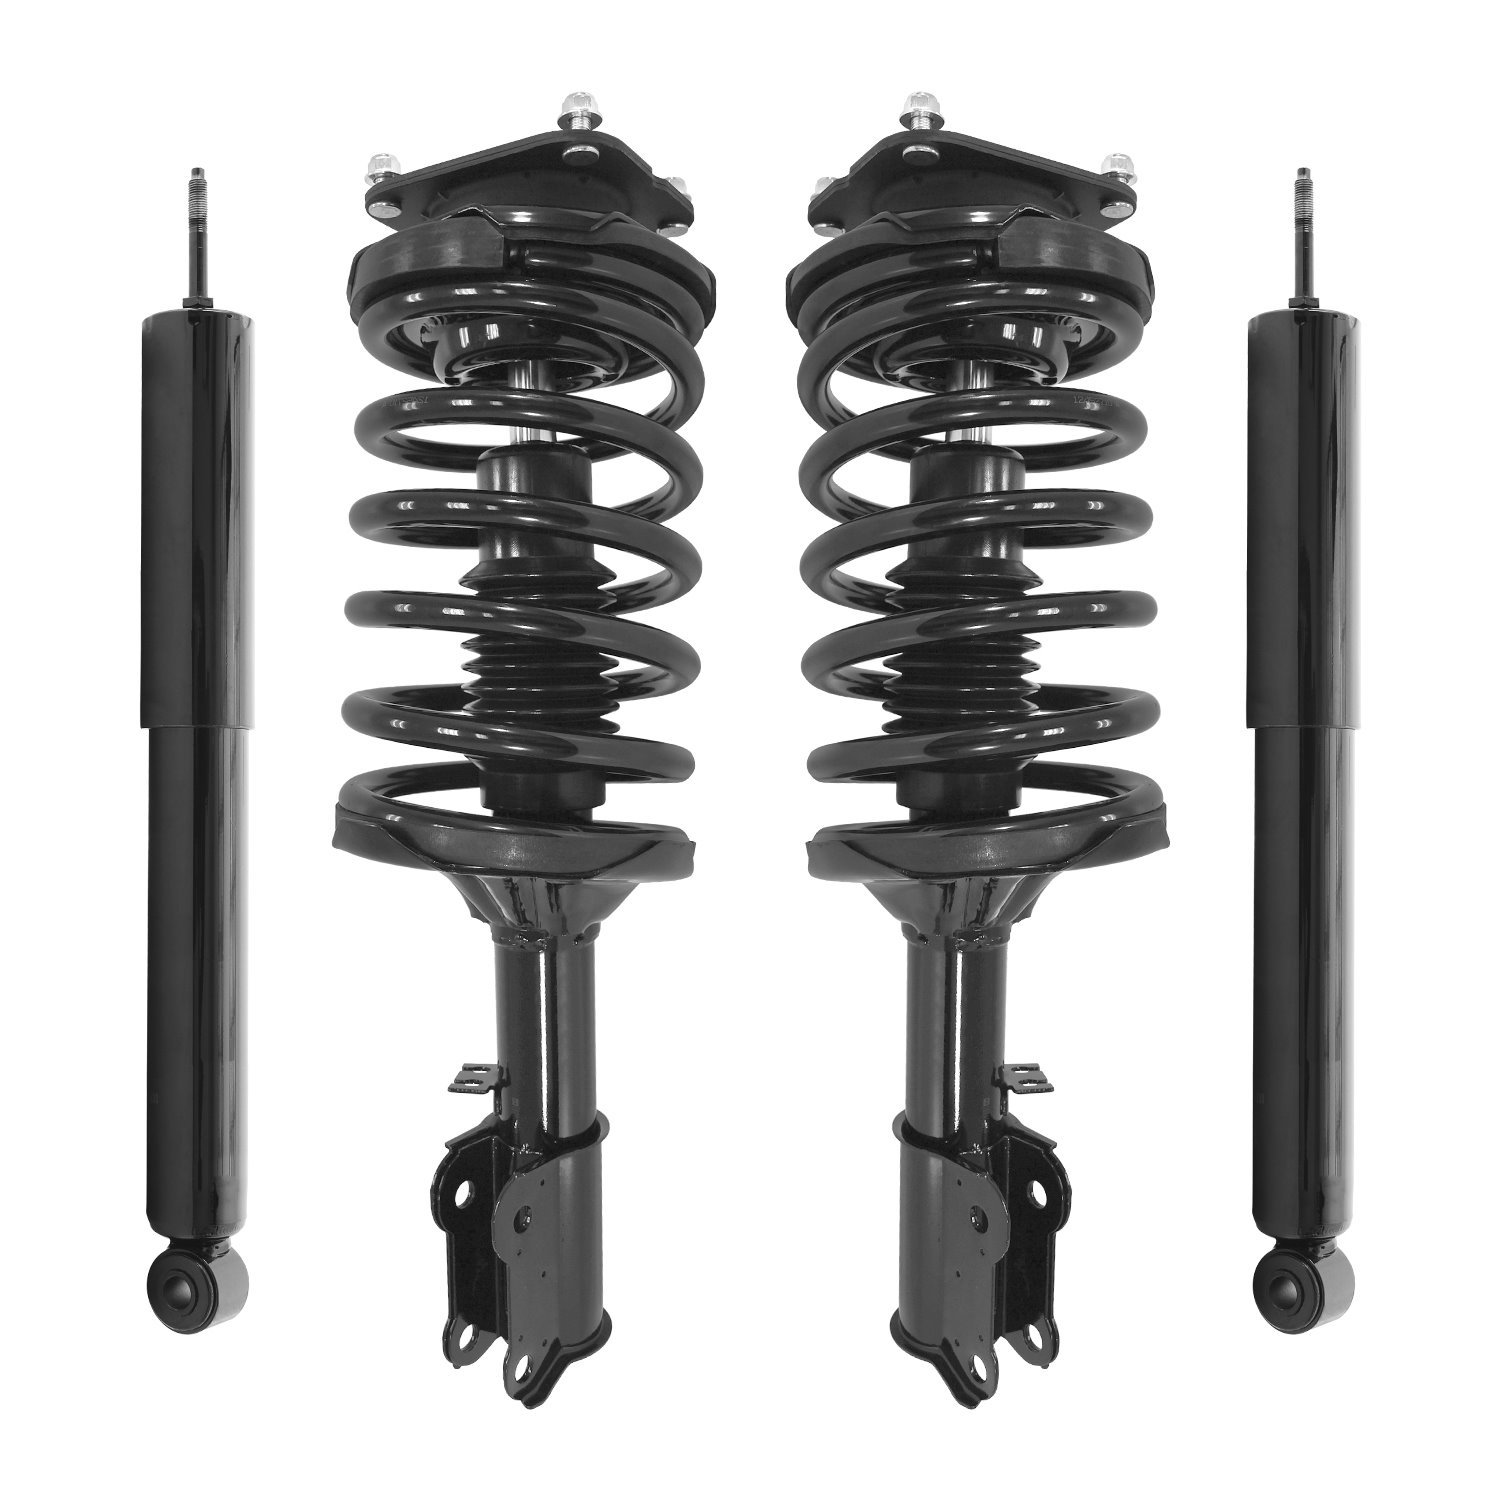 4-11953-259830-001 Front & Rear Suspension Strut & Coil Spring Assembly Fits Select Kia Sedona